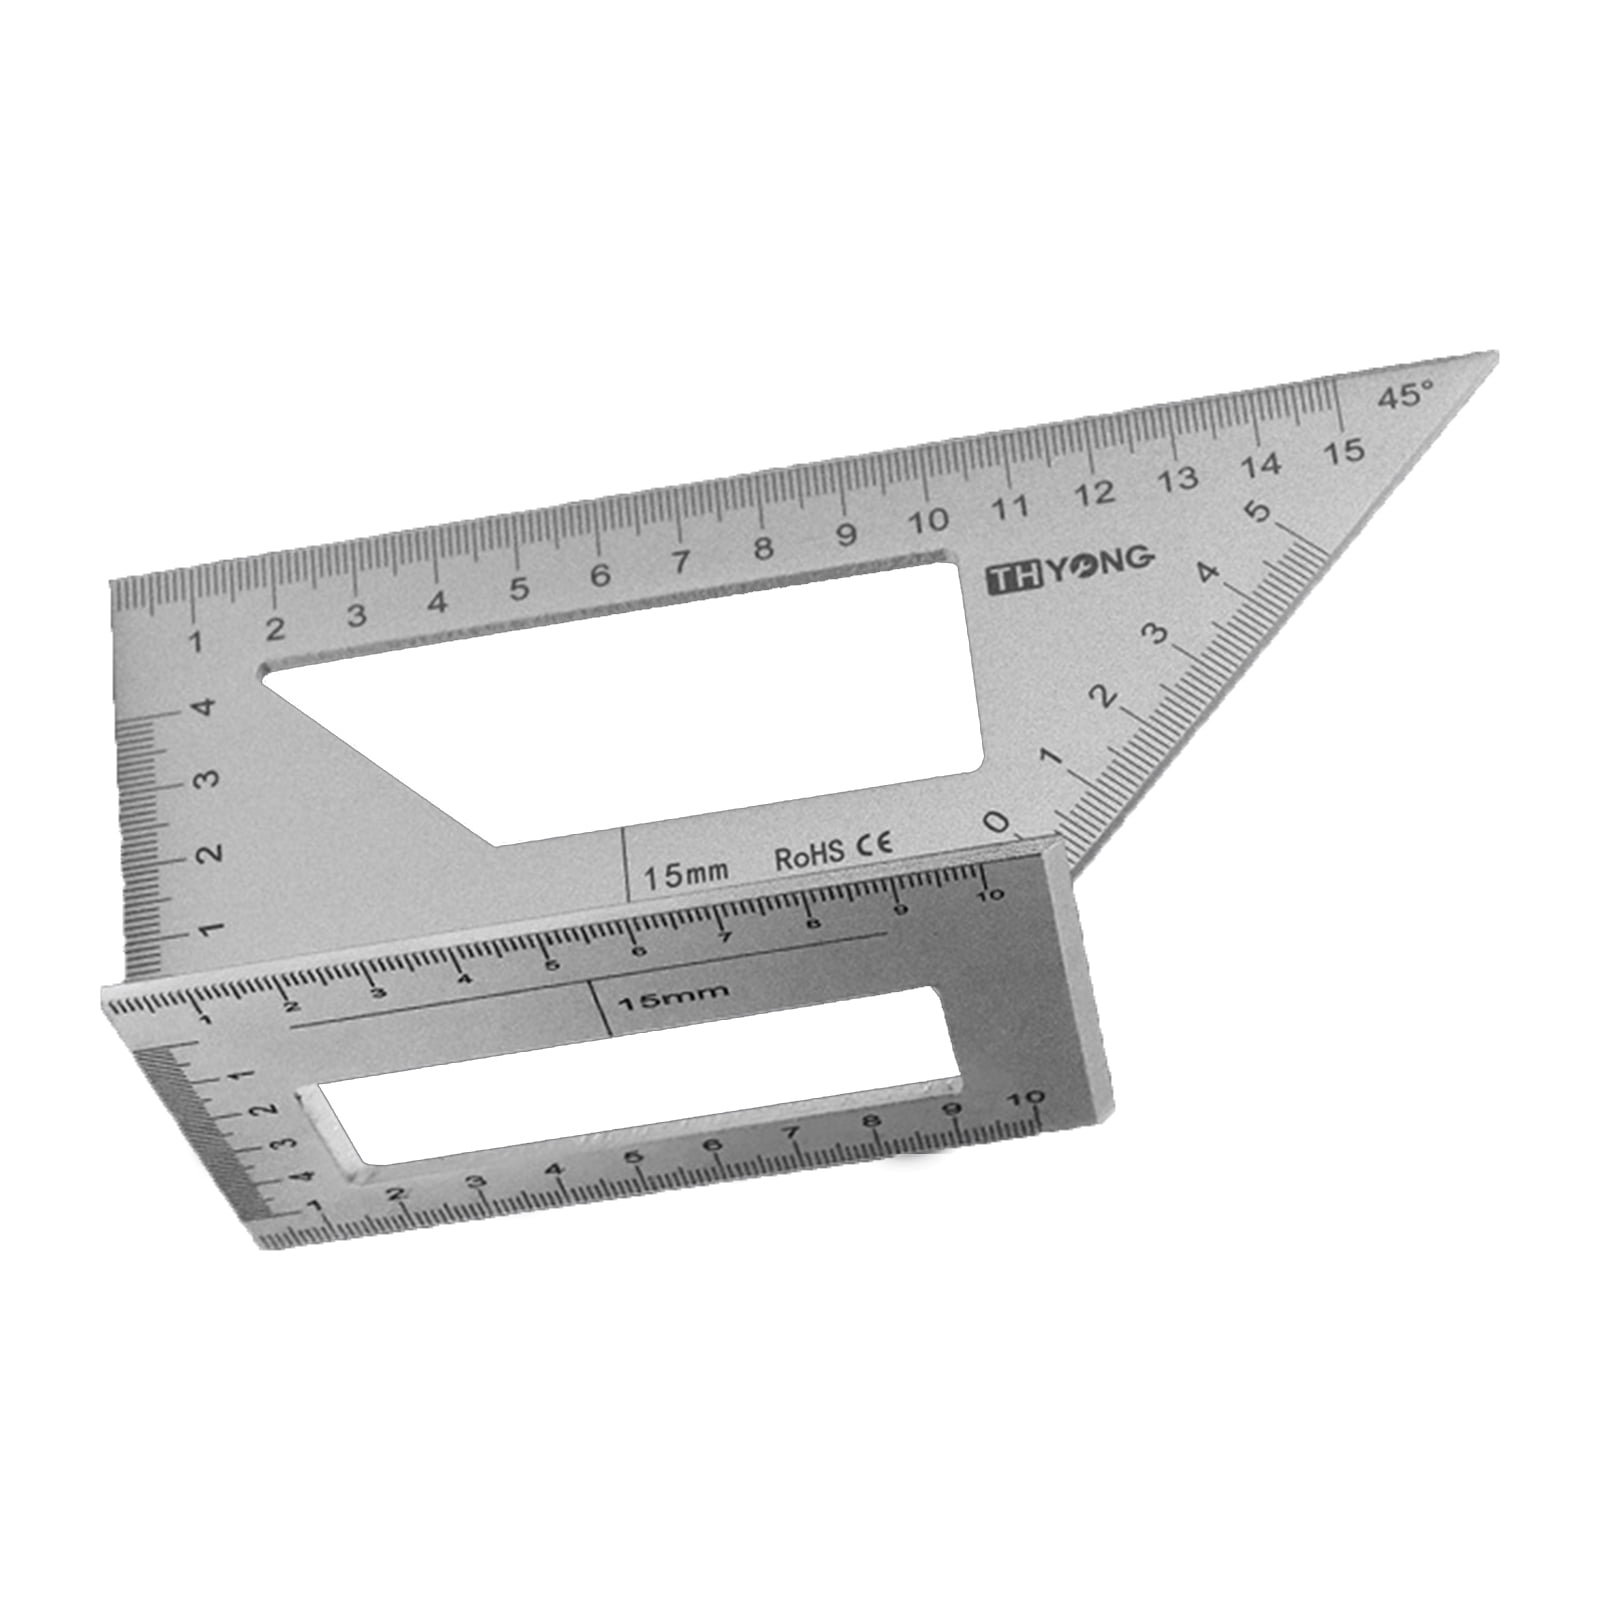 45/90 Degree Gauge Right Angle Ruler Measuring Woodworking Tool Protractor 